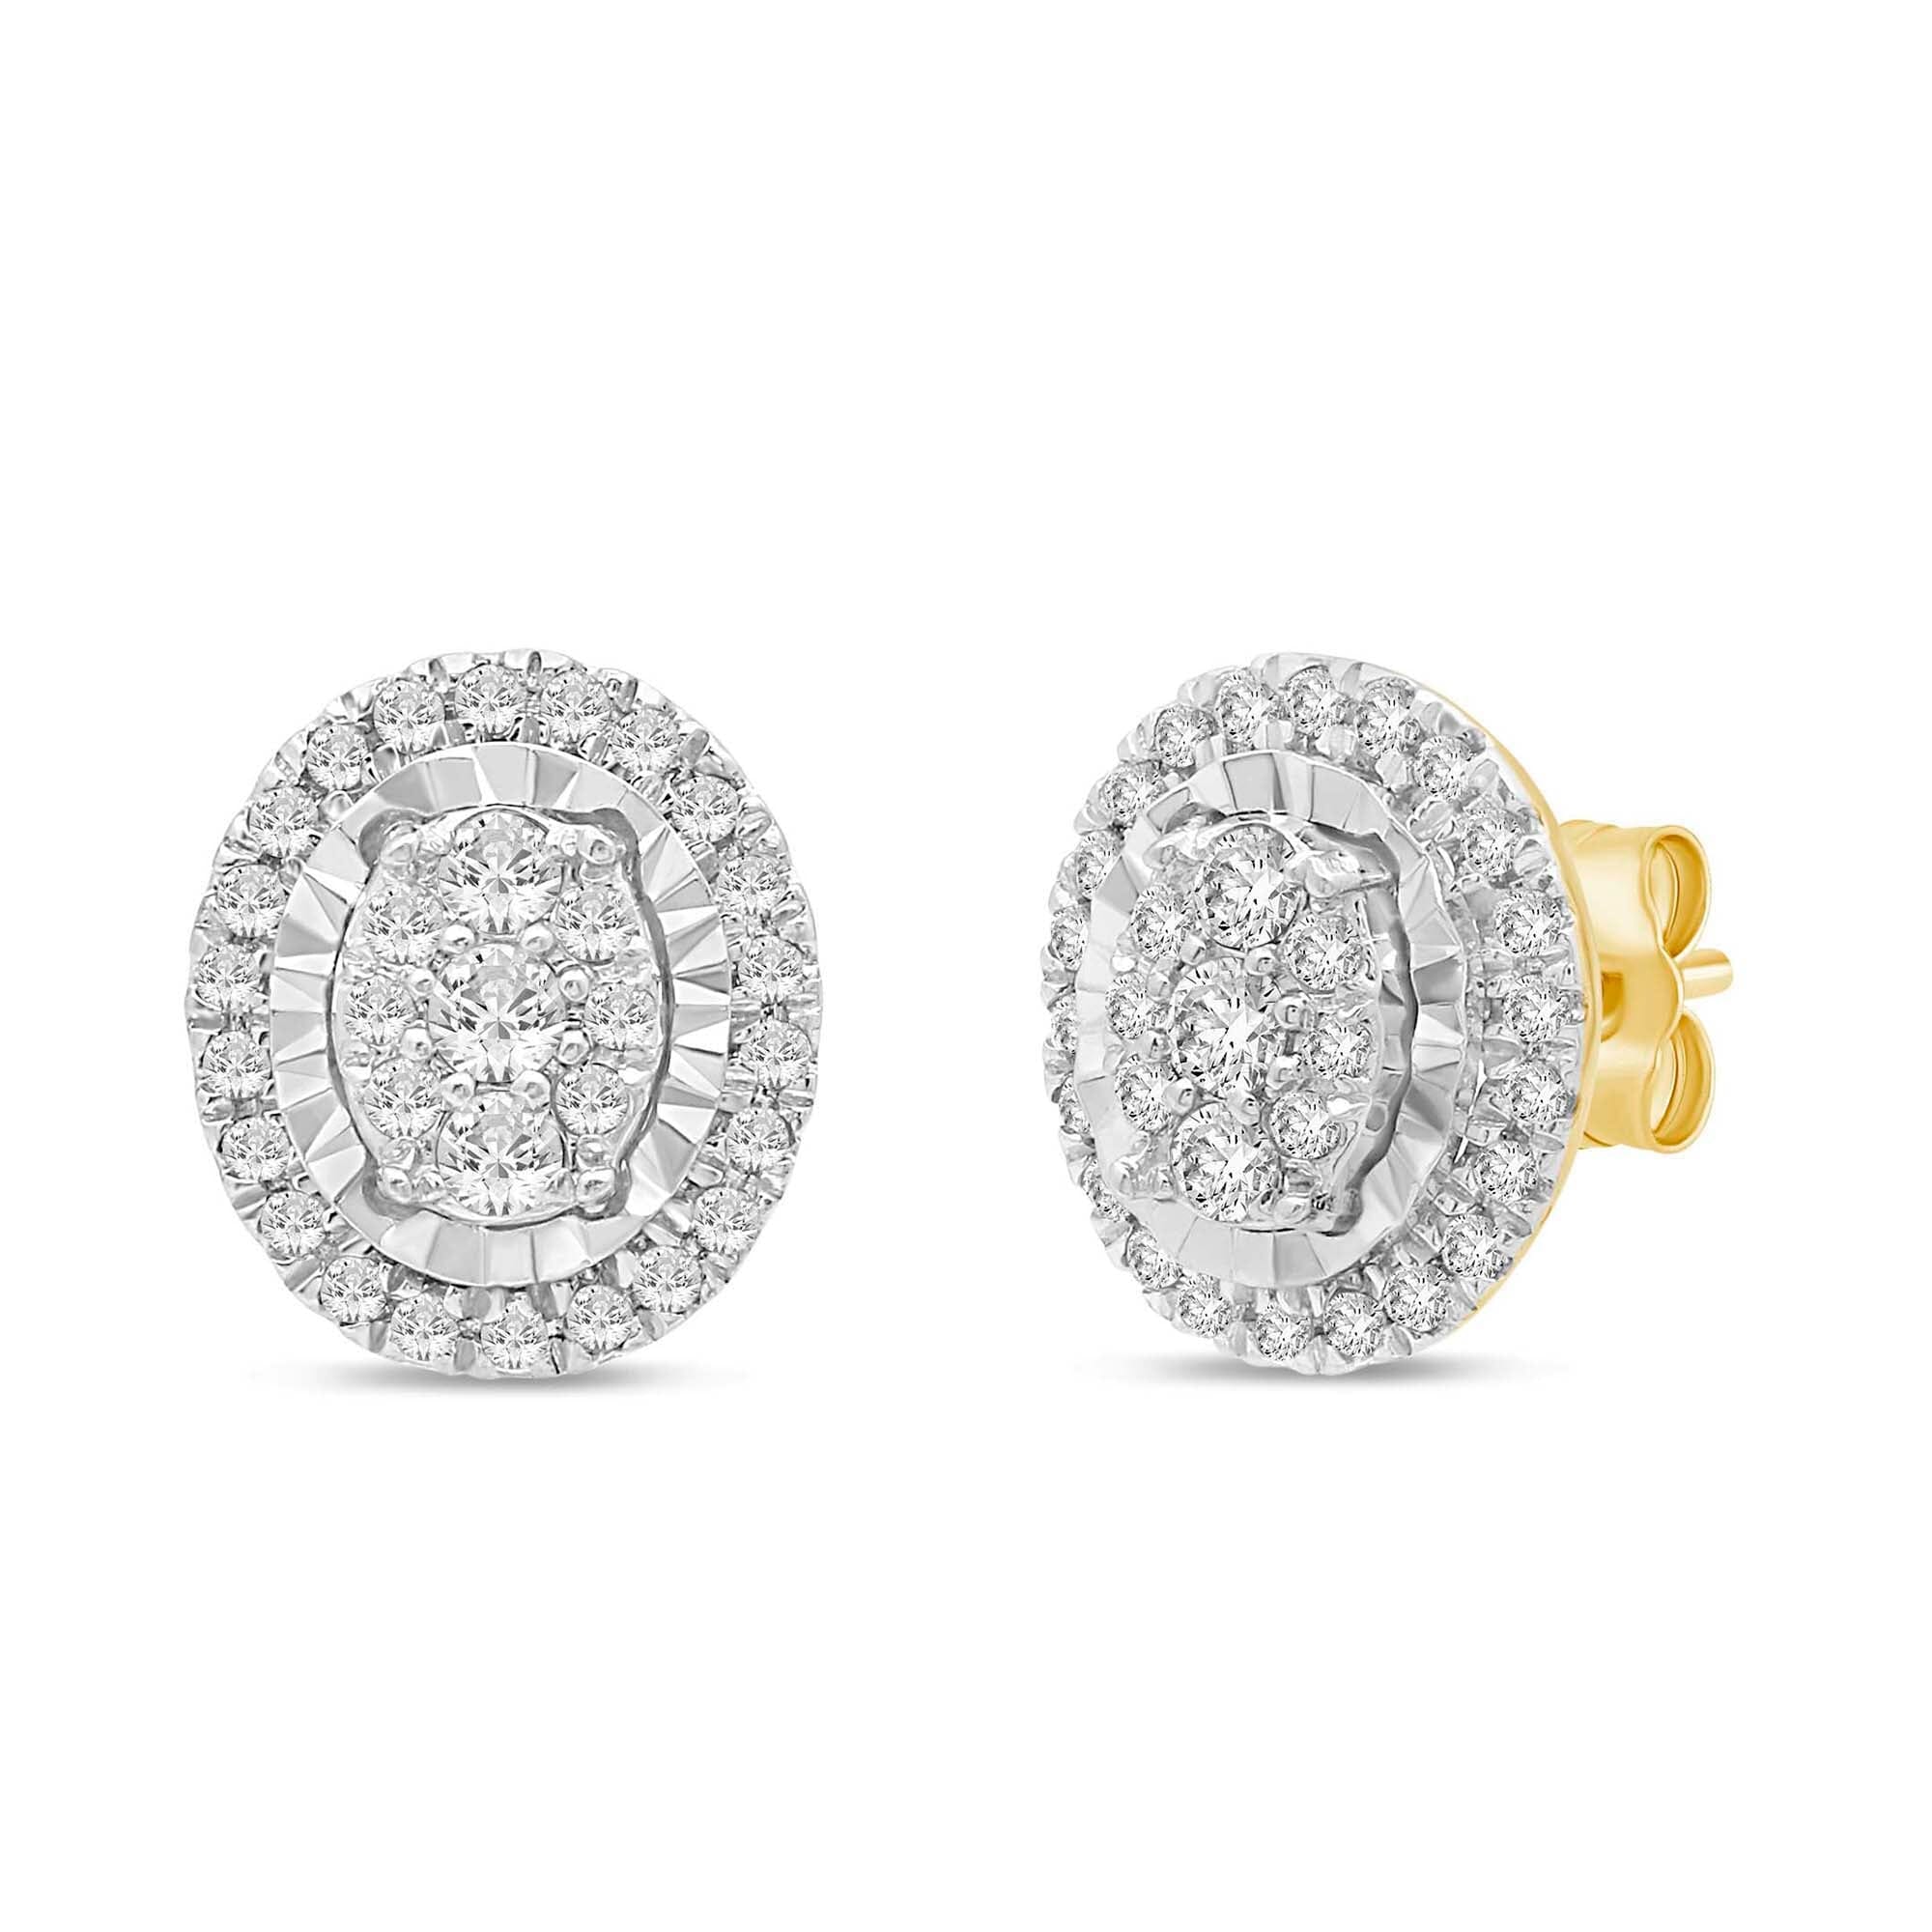 Oval Shaped Stud Earrings with 0.40ct of Diamonds in 9ct Yellow Gold Earrings Bevilles 